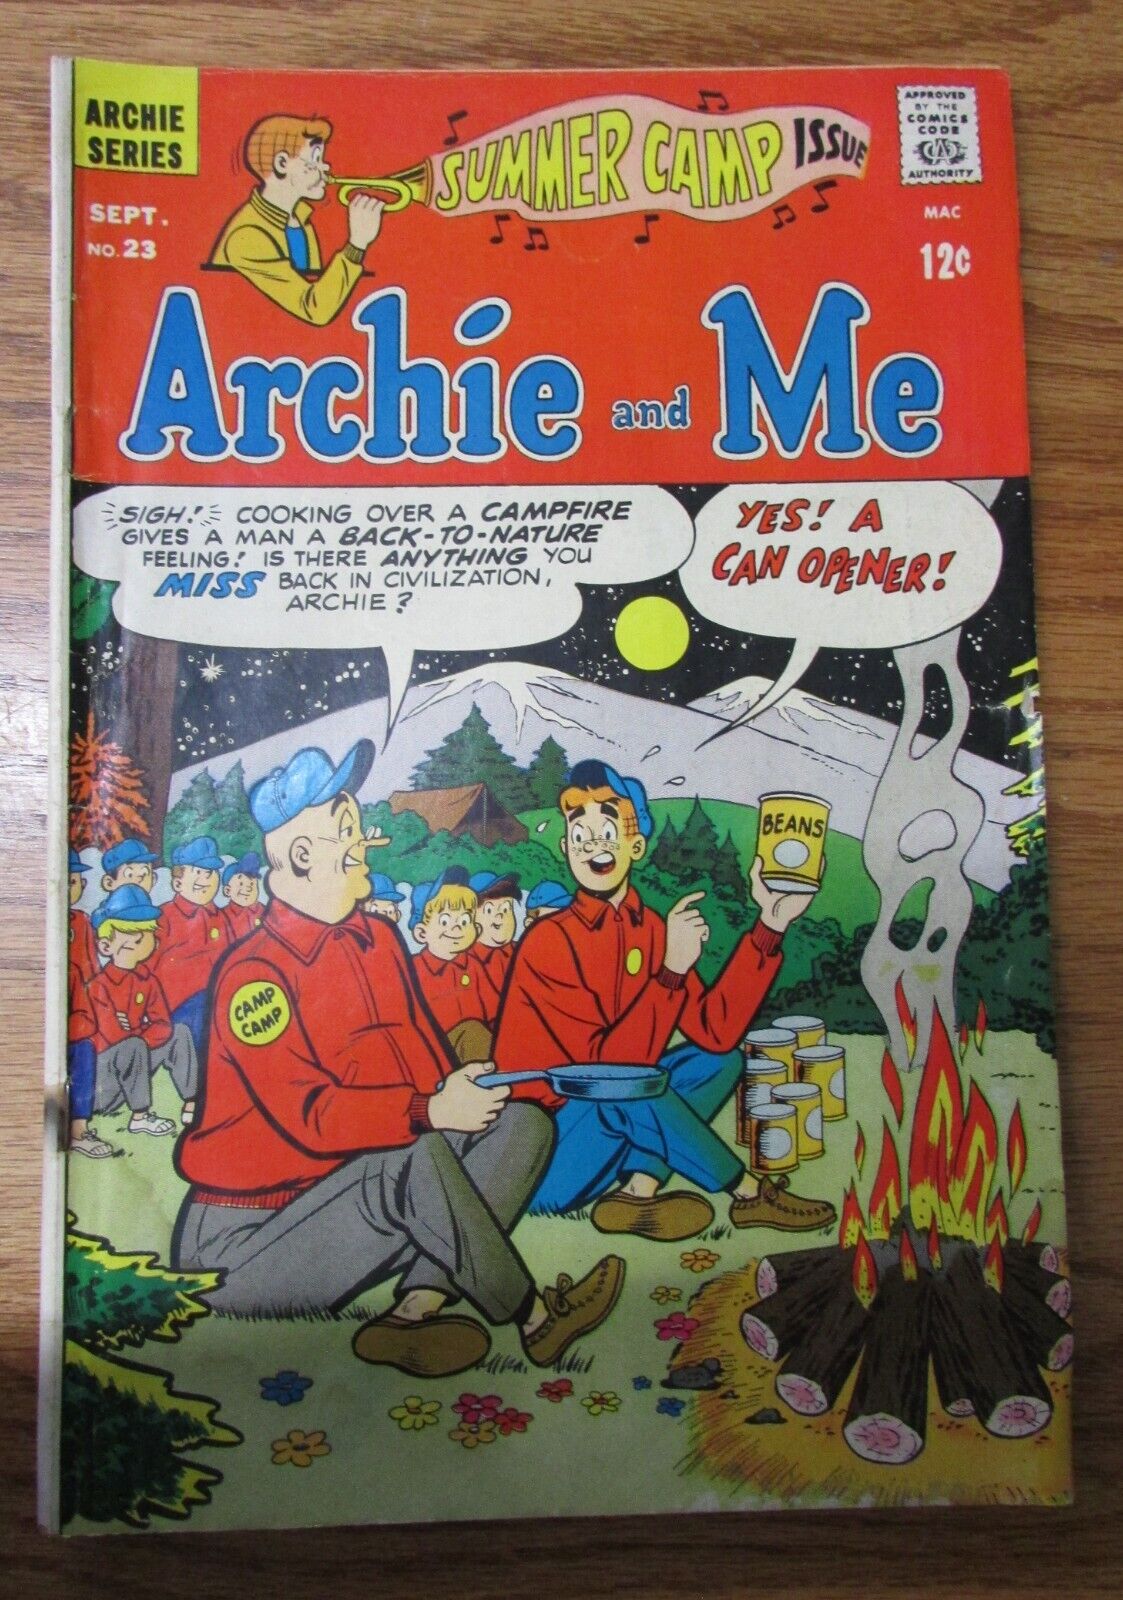 COMIC BOOK ARCHIE SERIES ARCHIE AND ME SUMMER CAMP ISSUE #23 SEPT 1968 12¢